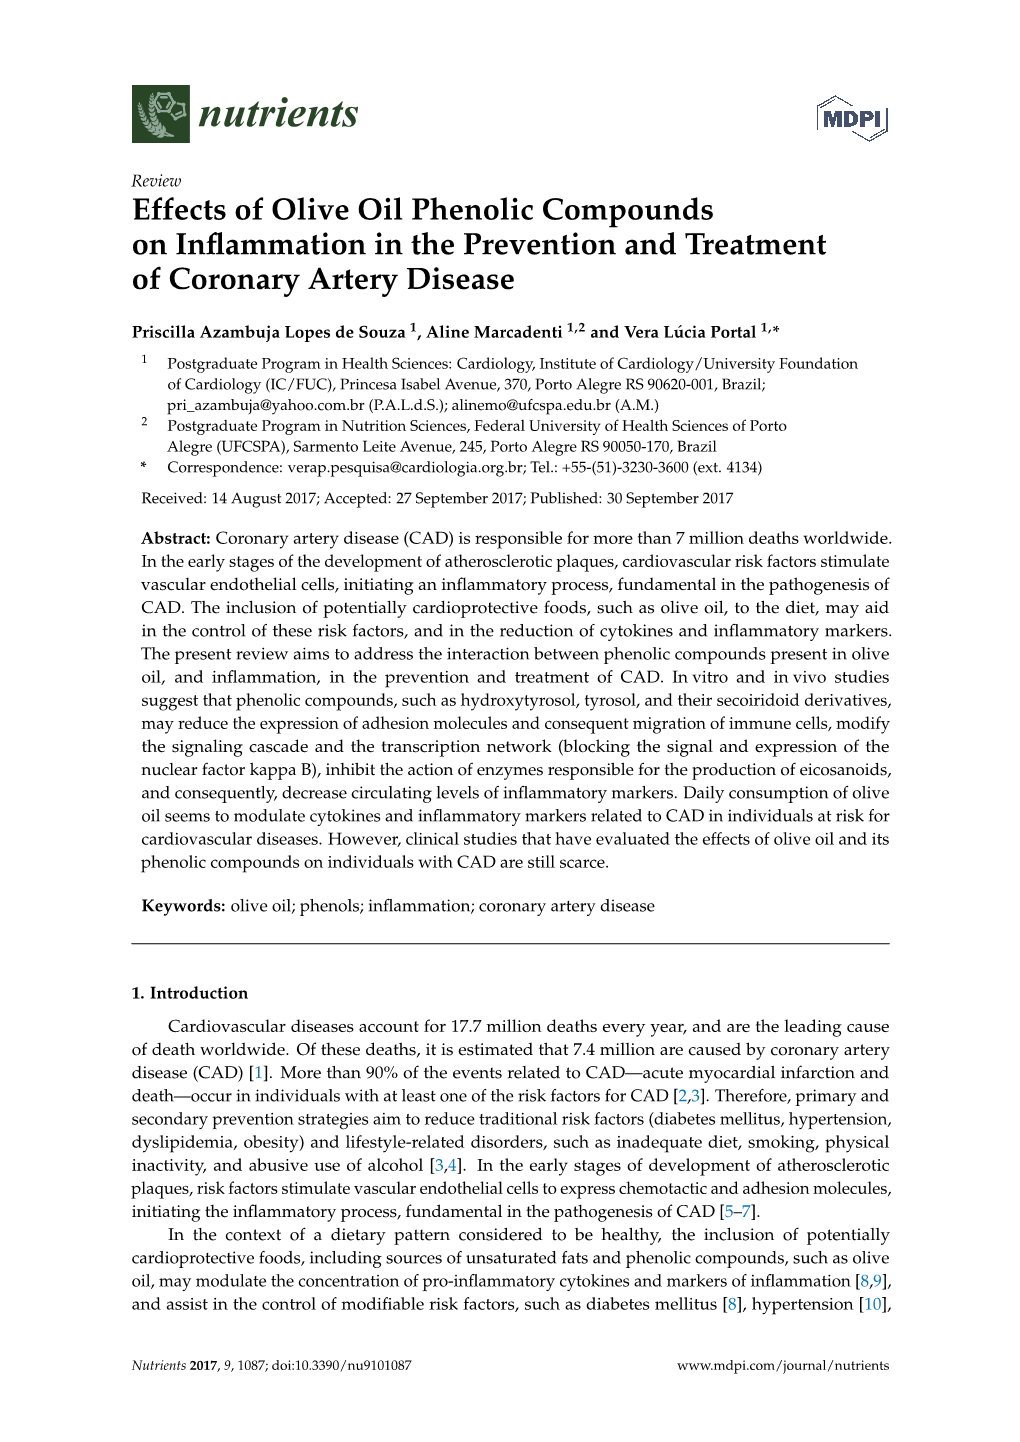 Effects of Olive Oil Phenolic Compounds on Inflammation in the Prevention and Treatment of Coronary Artery Disease